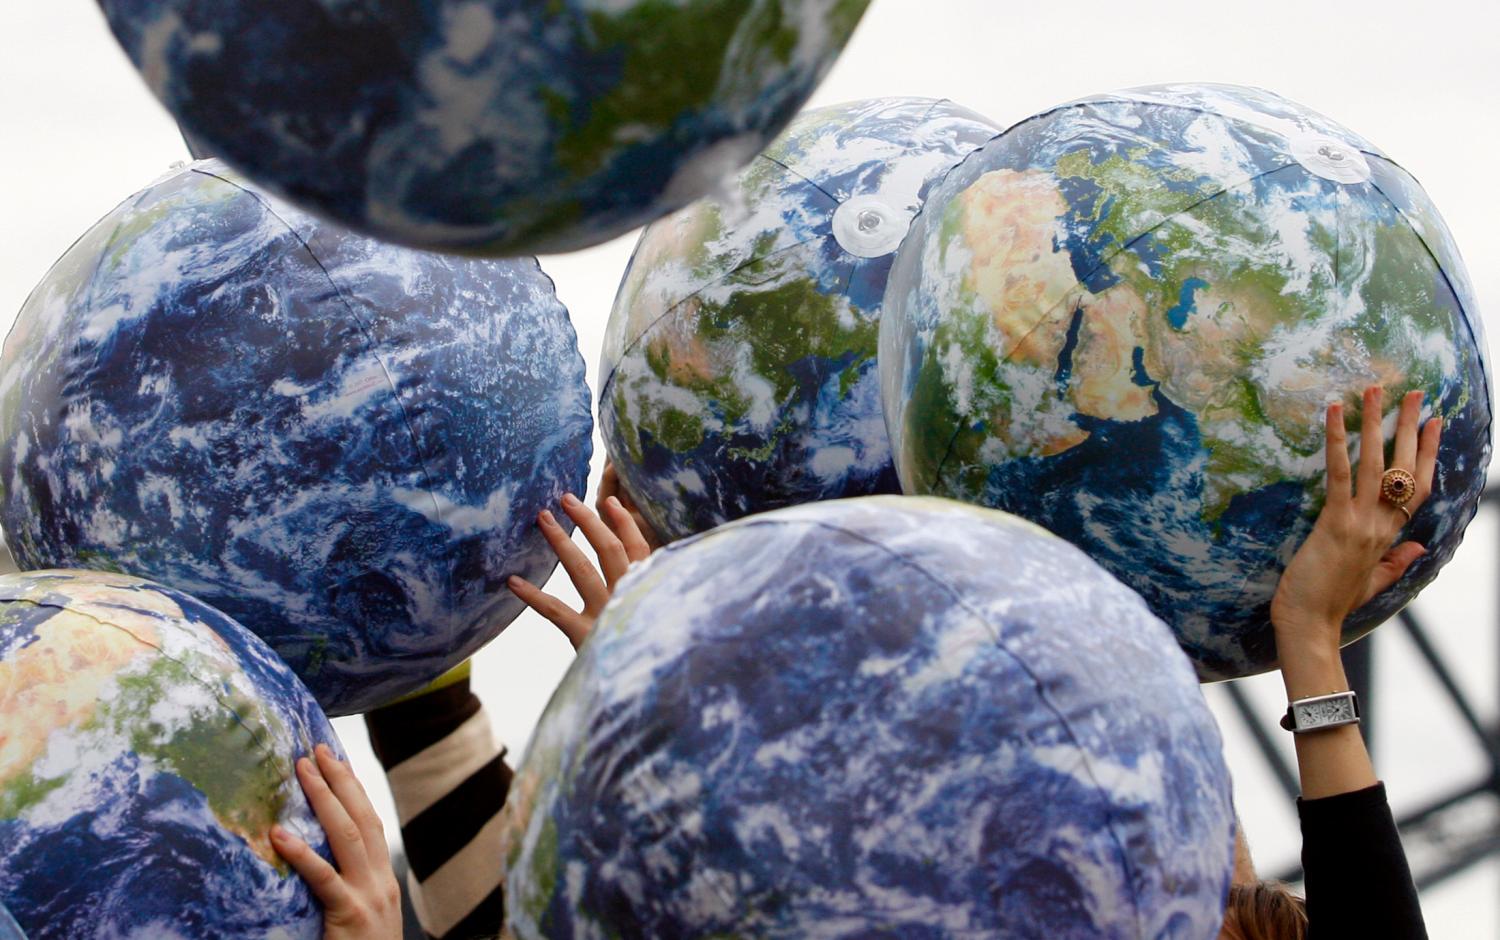 People hold up inflatable world globes during World Environment Day celebrations in central Sydney